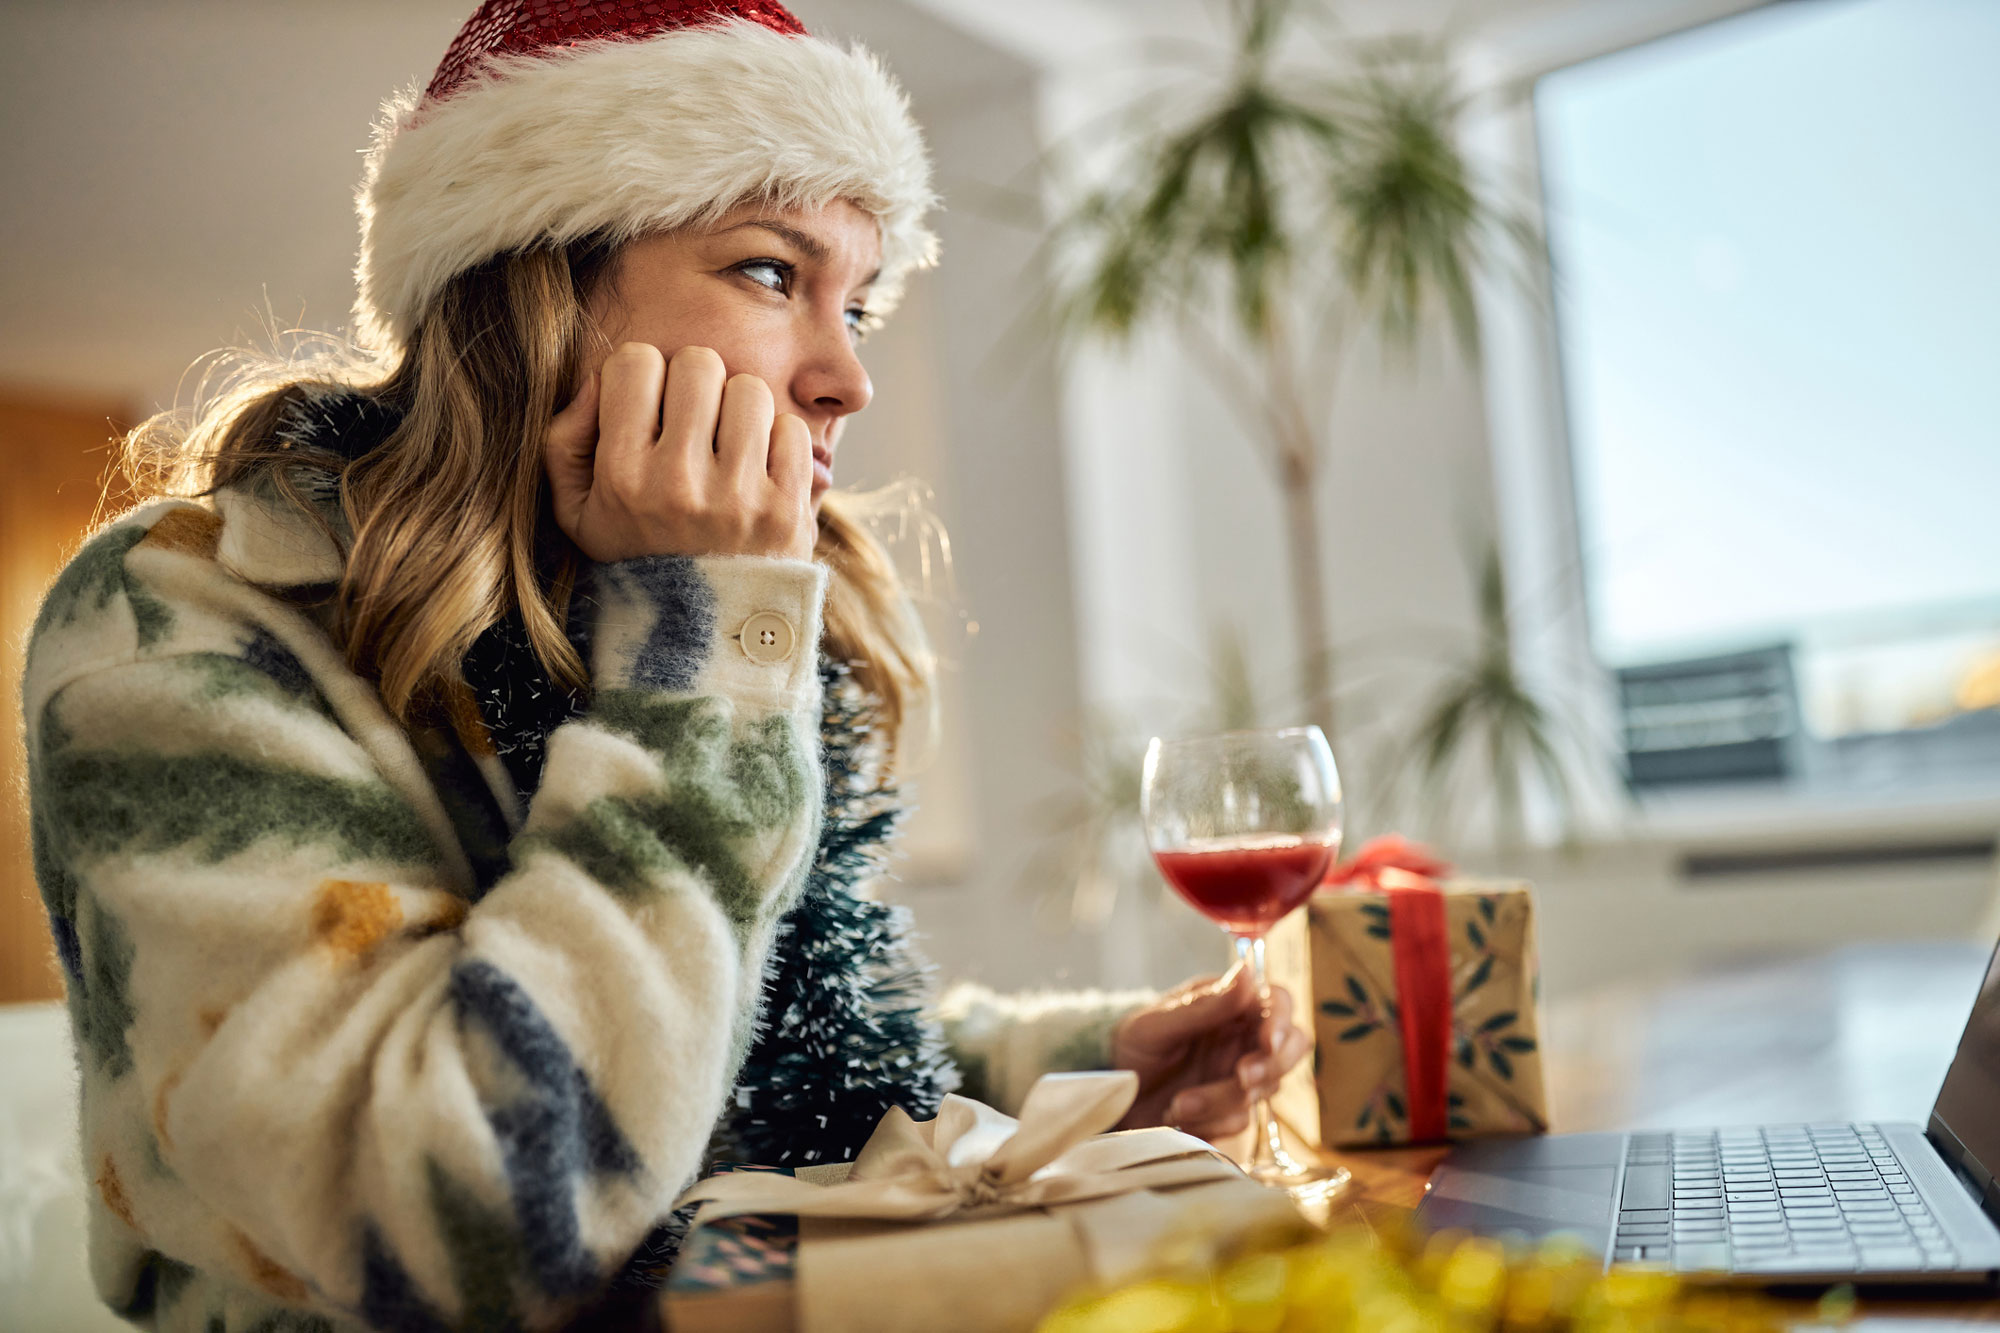 woman wearing a Santa hat drinking wine and thinking while spending time alone at home